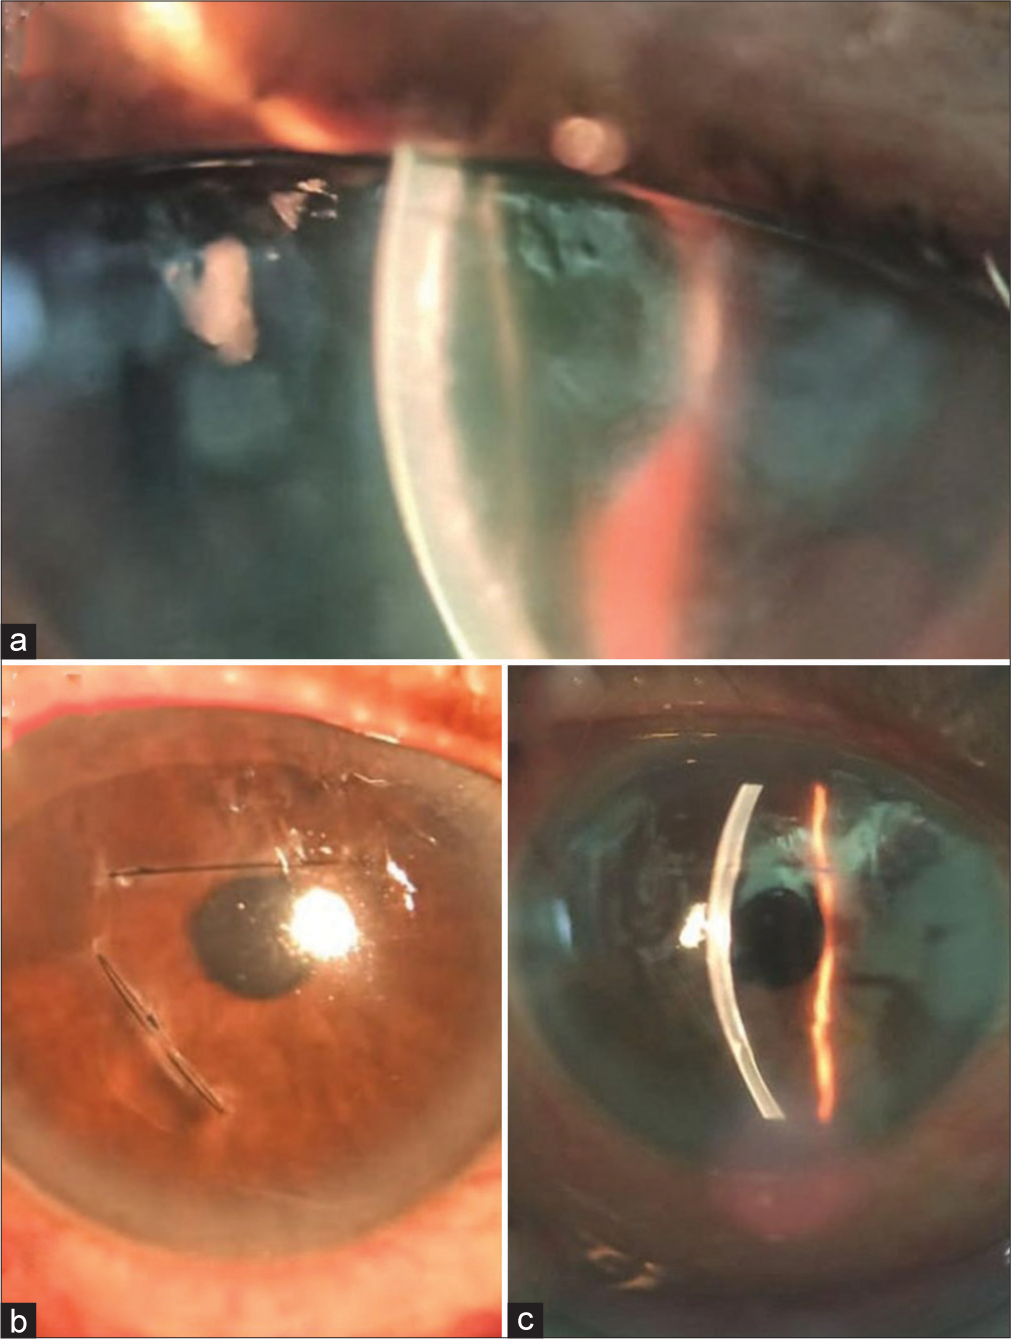 Pre-operative and post-operative image (a) pre-operative image showing non-planar Descemet membrane (DM) detachment (b) Post-operative image showing corneal sutures placed in the superior half and mid periphery temporally (c) Post-operative slit-lamp image showing attached DM.